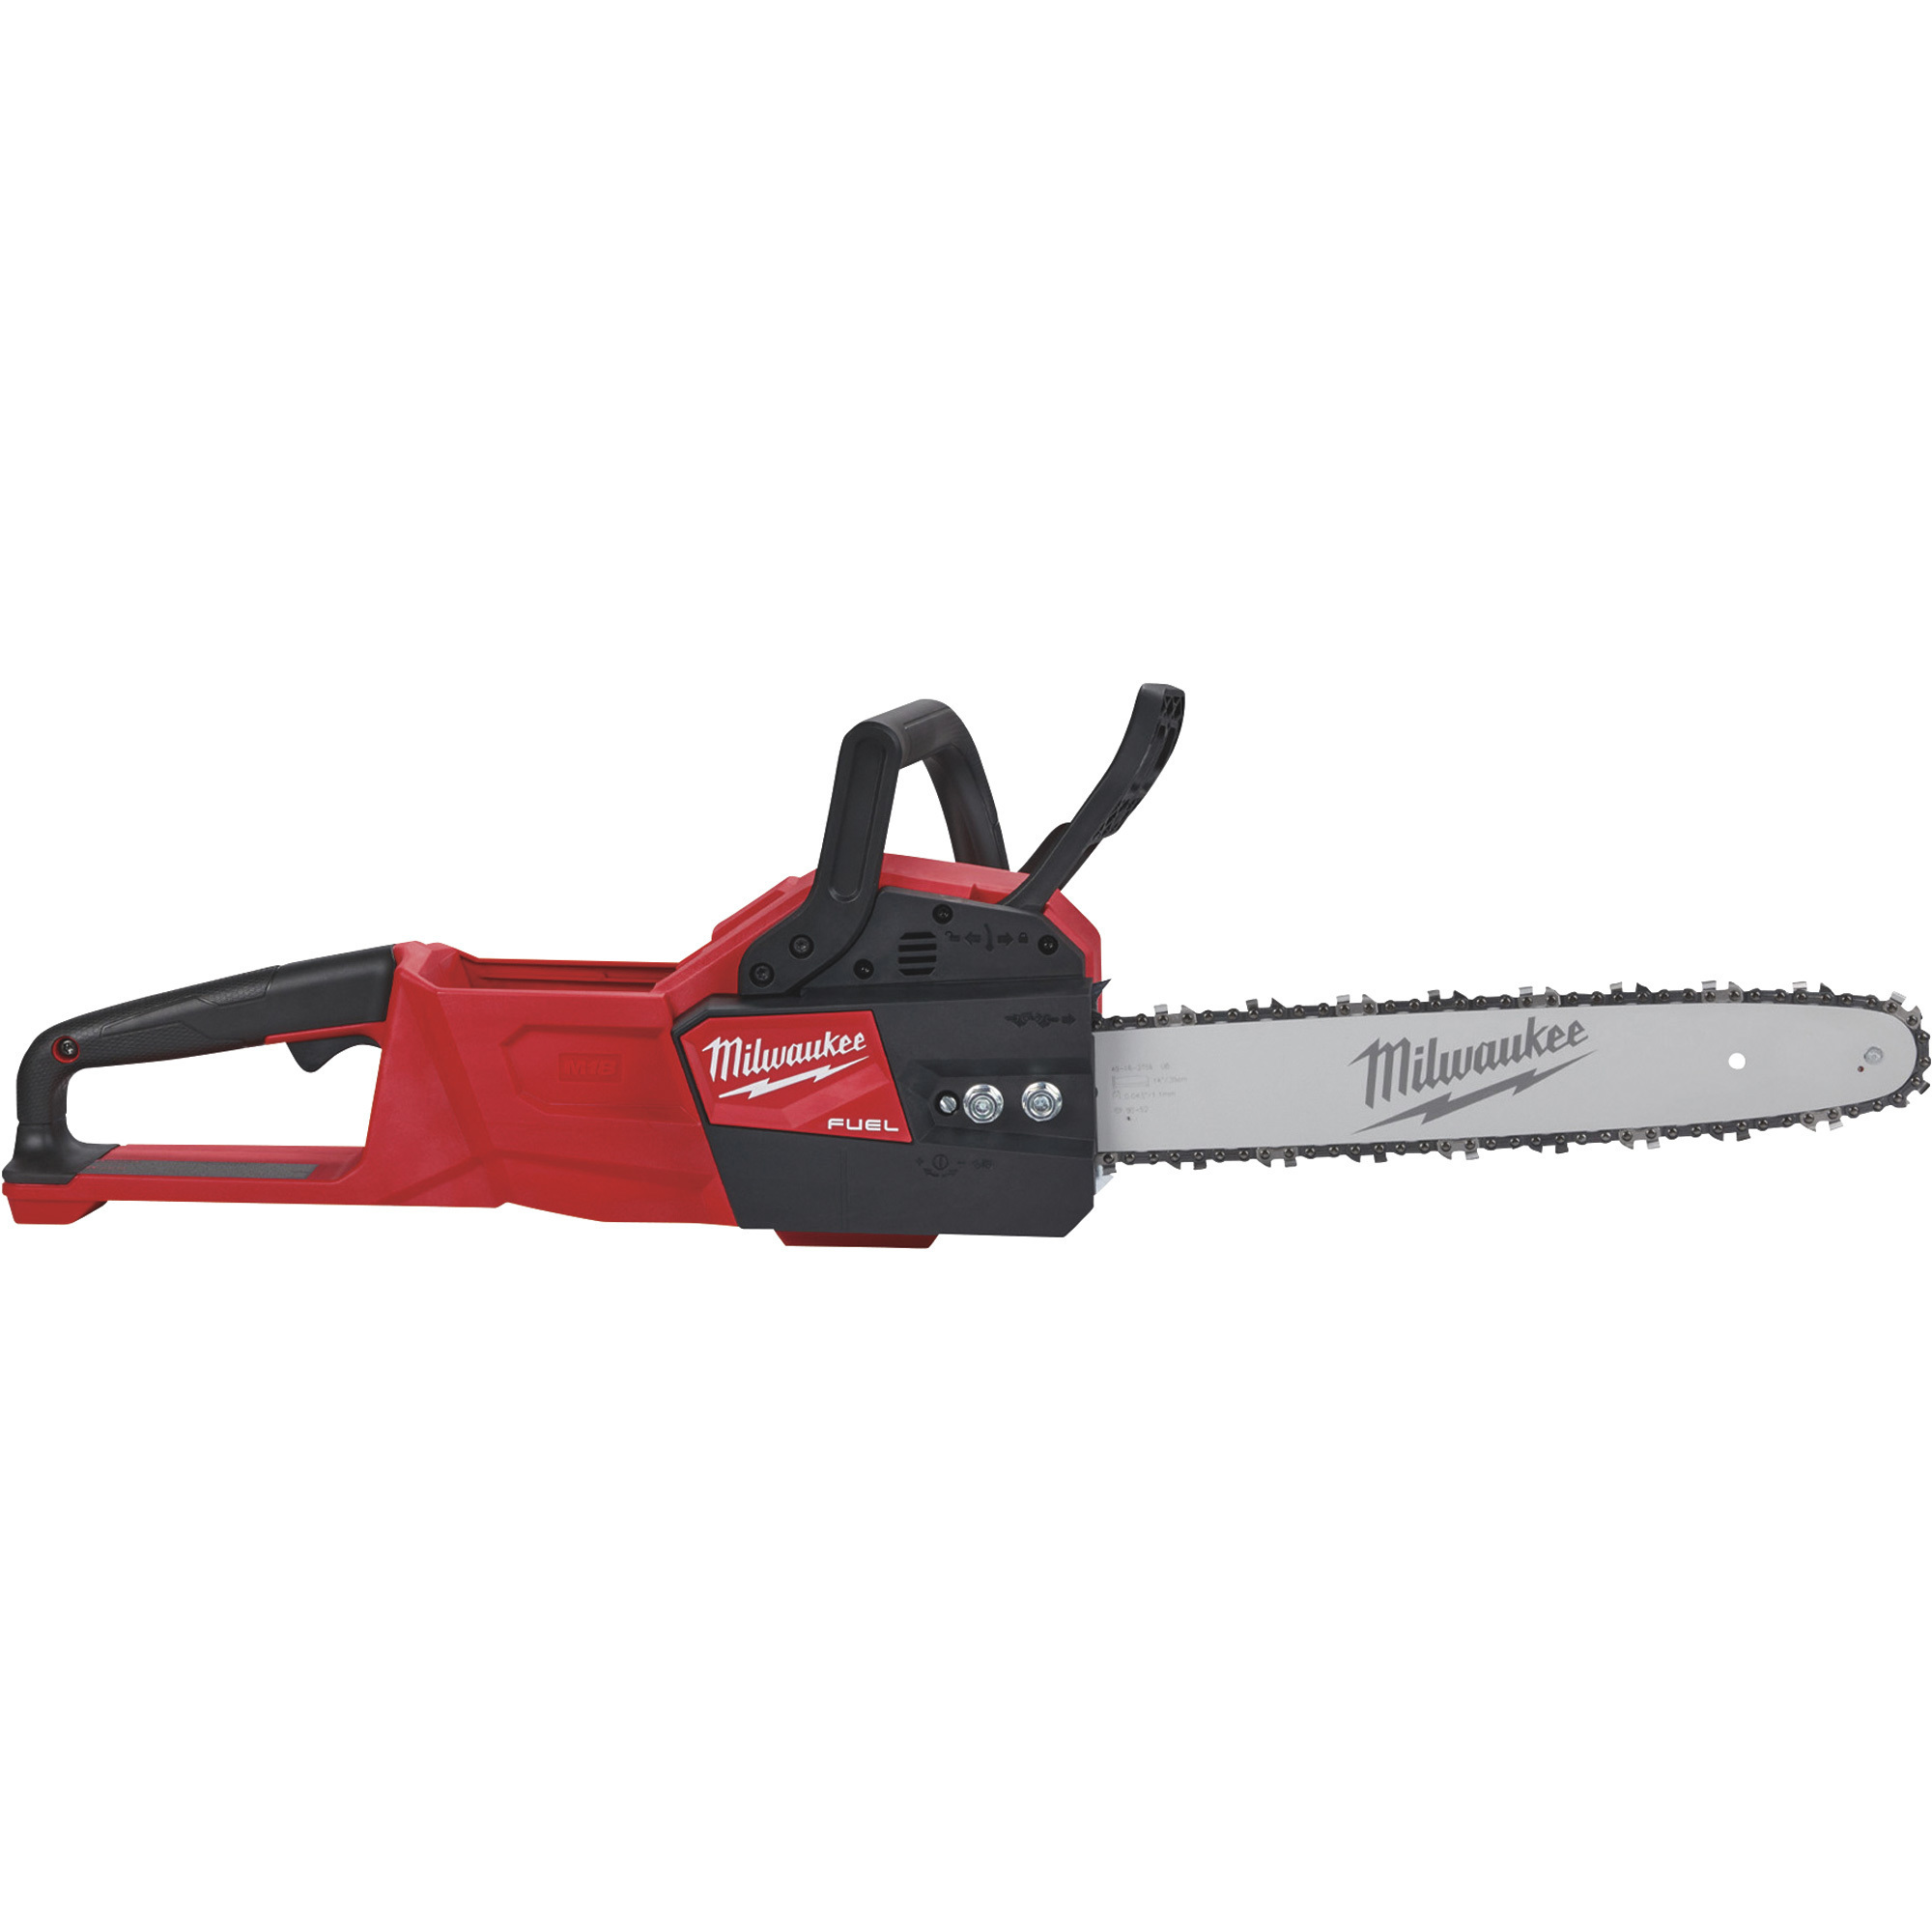 Milwaukee 18V M18 Fuel Lithium-Ion Cordless Chainsaw Bare Tool, 16Inch Bar, Model 2727-20